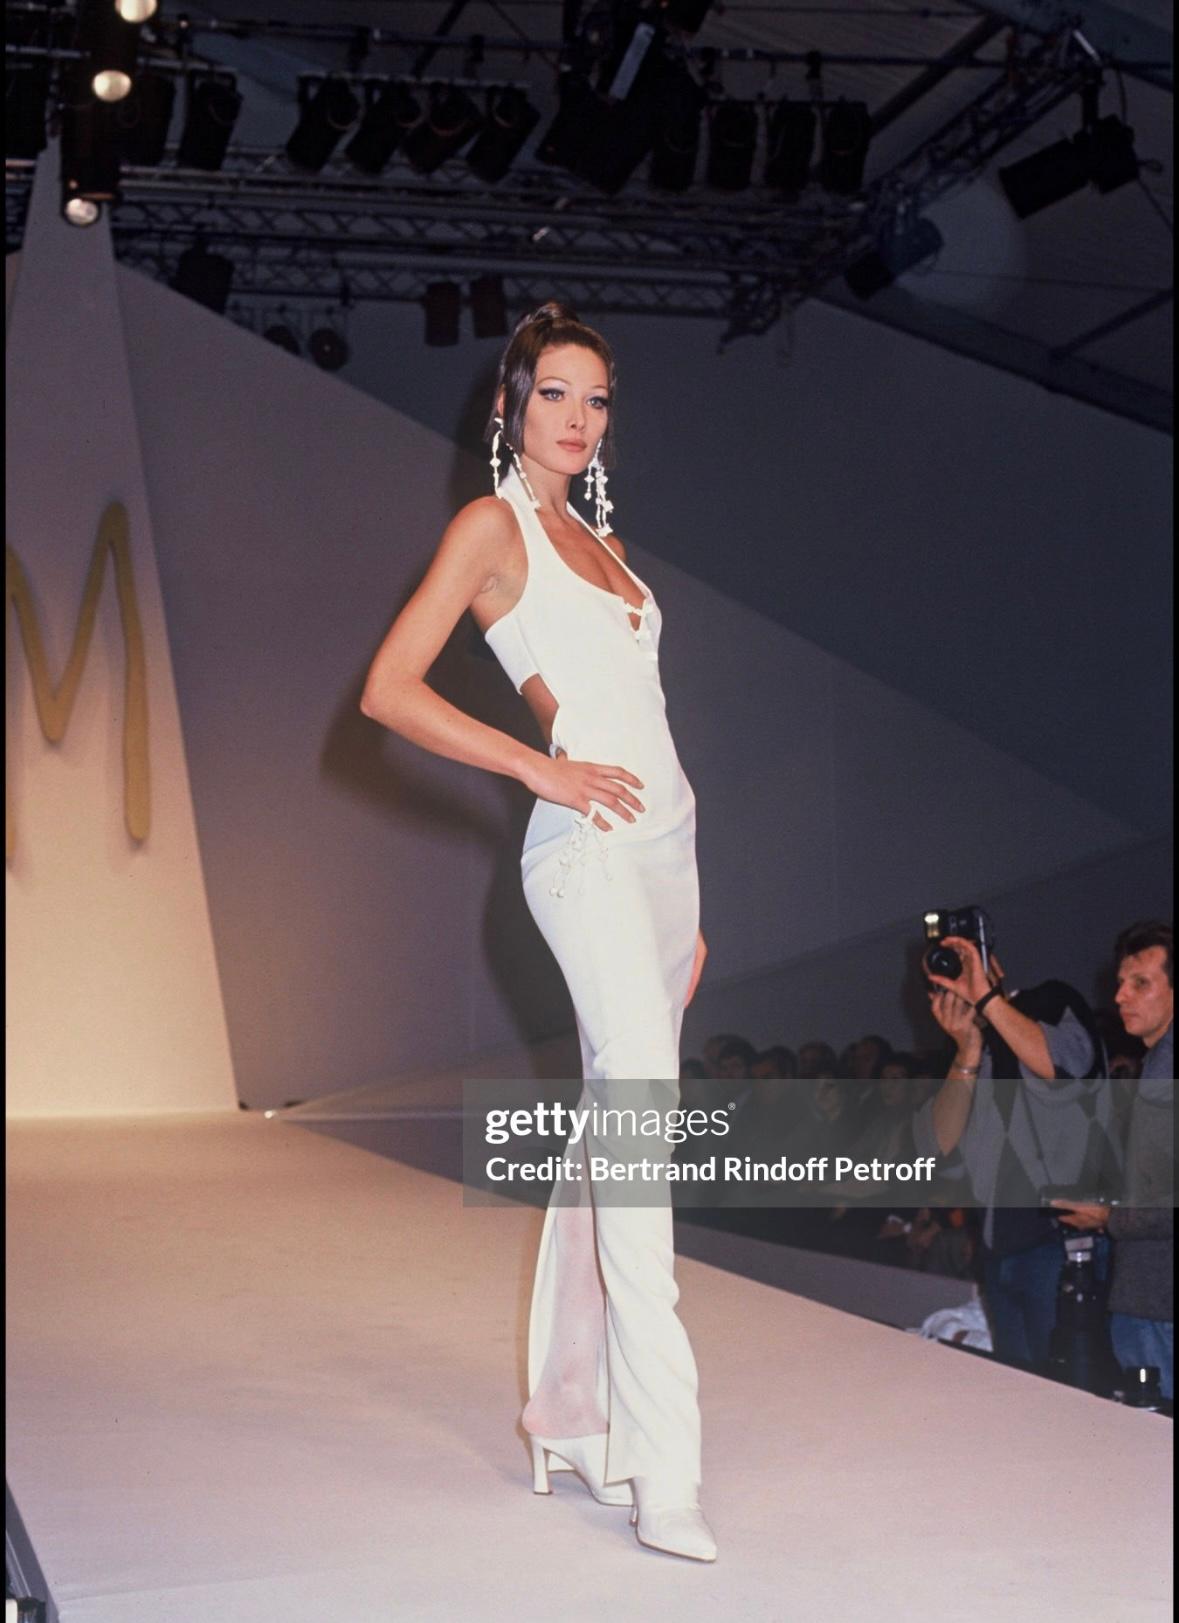 From Claude Montana's Spring/Summer 1993 collection, this stunning black halter-neck gown features a scoop neckline with a small plunge, accented with white beads across the bust. This fabulous gown debuted on the season's runway in white, modeled